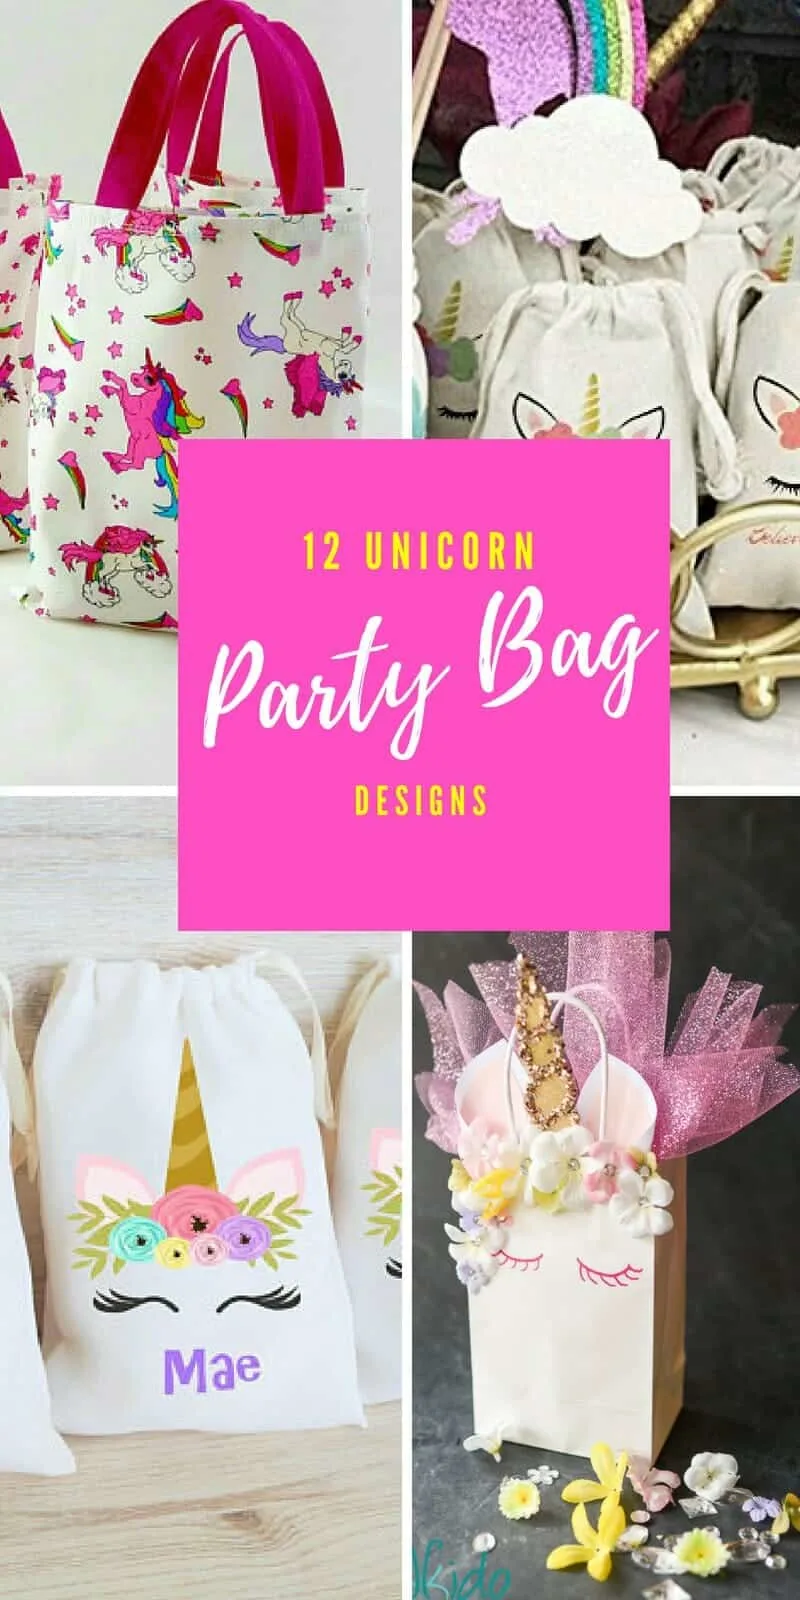 Unicorn Party Favors - 12 Unicorn Party Bags - Party with Unicorns